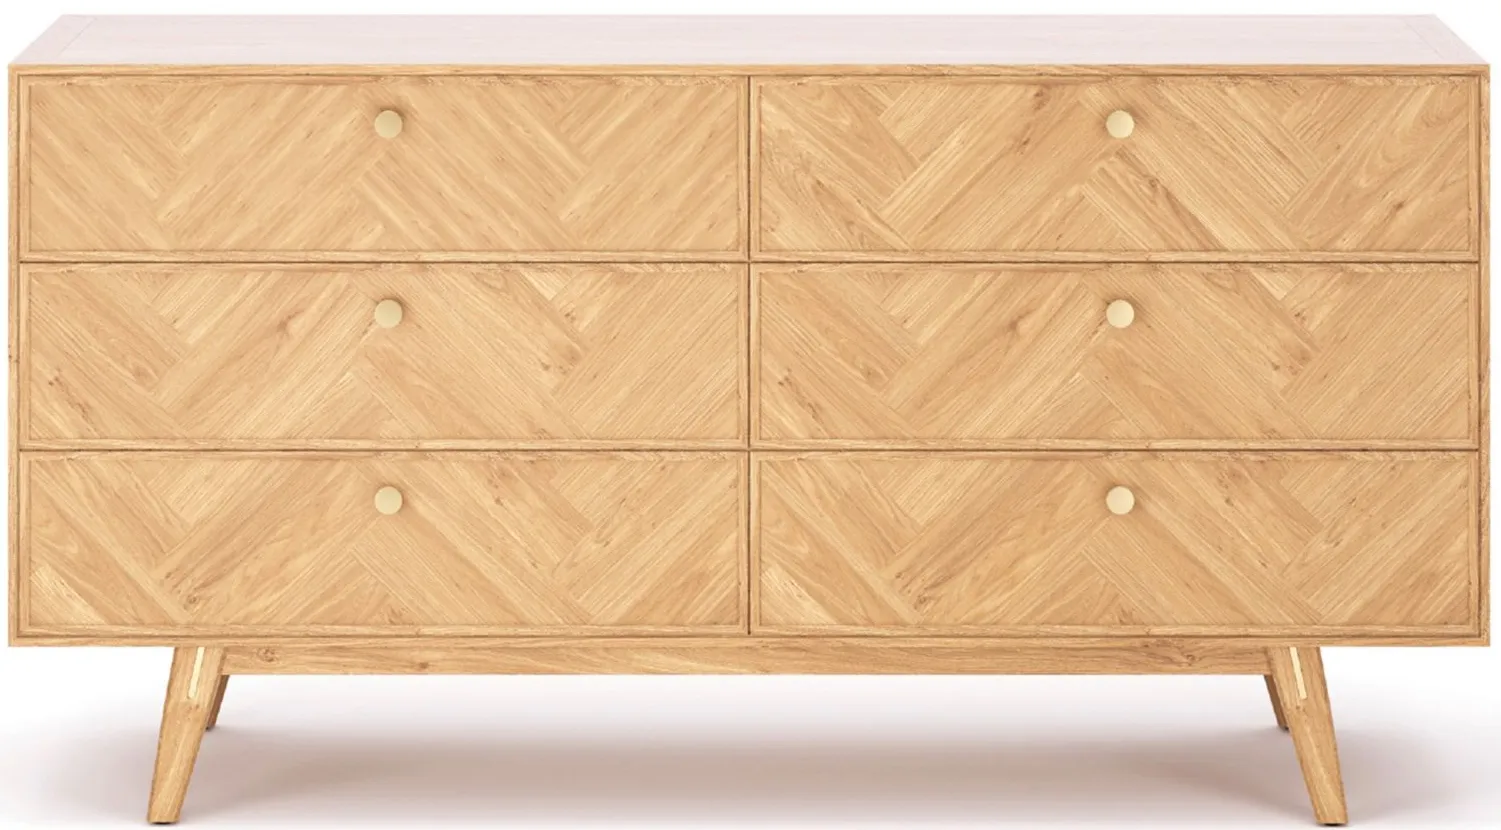 Colton 6-Drawer Dresser in Natural by LH Imports Ltd